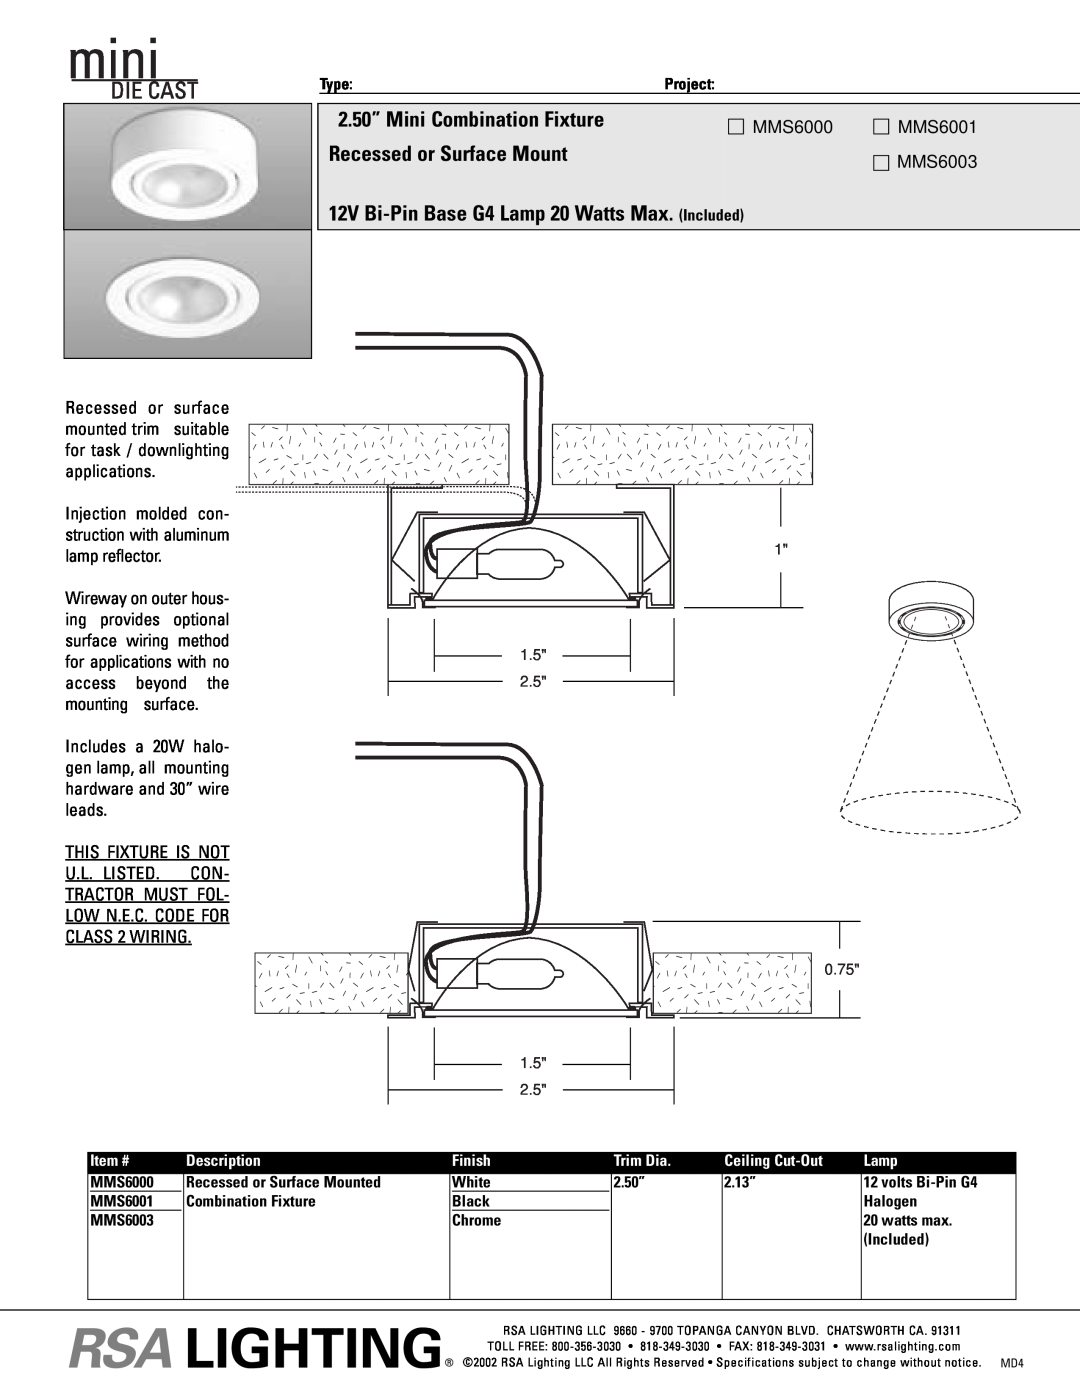 Cooper Lighting MMS6000 specifications 2.50” Mini Combination Fixture, Recessed or Surface Mount, MMS6001, MMS6003 